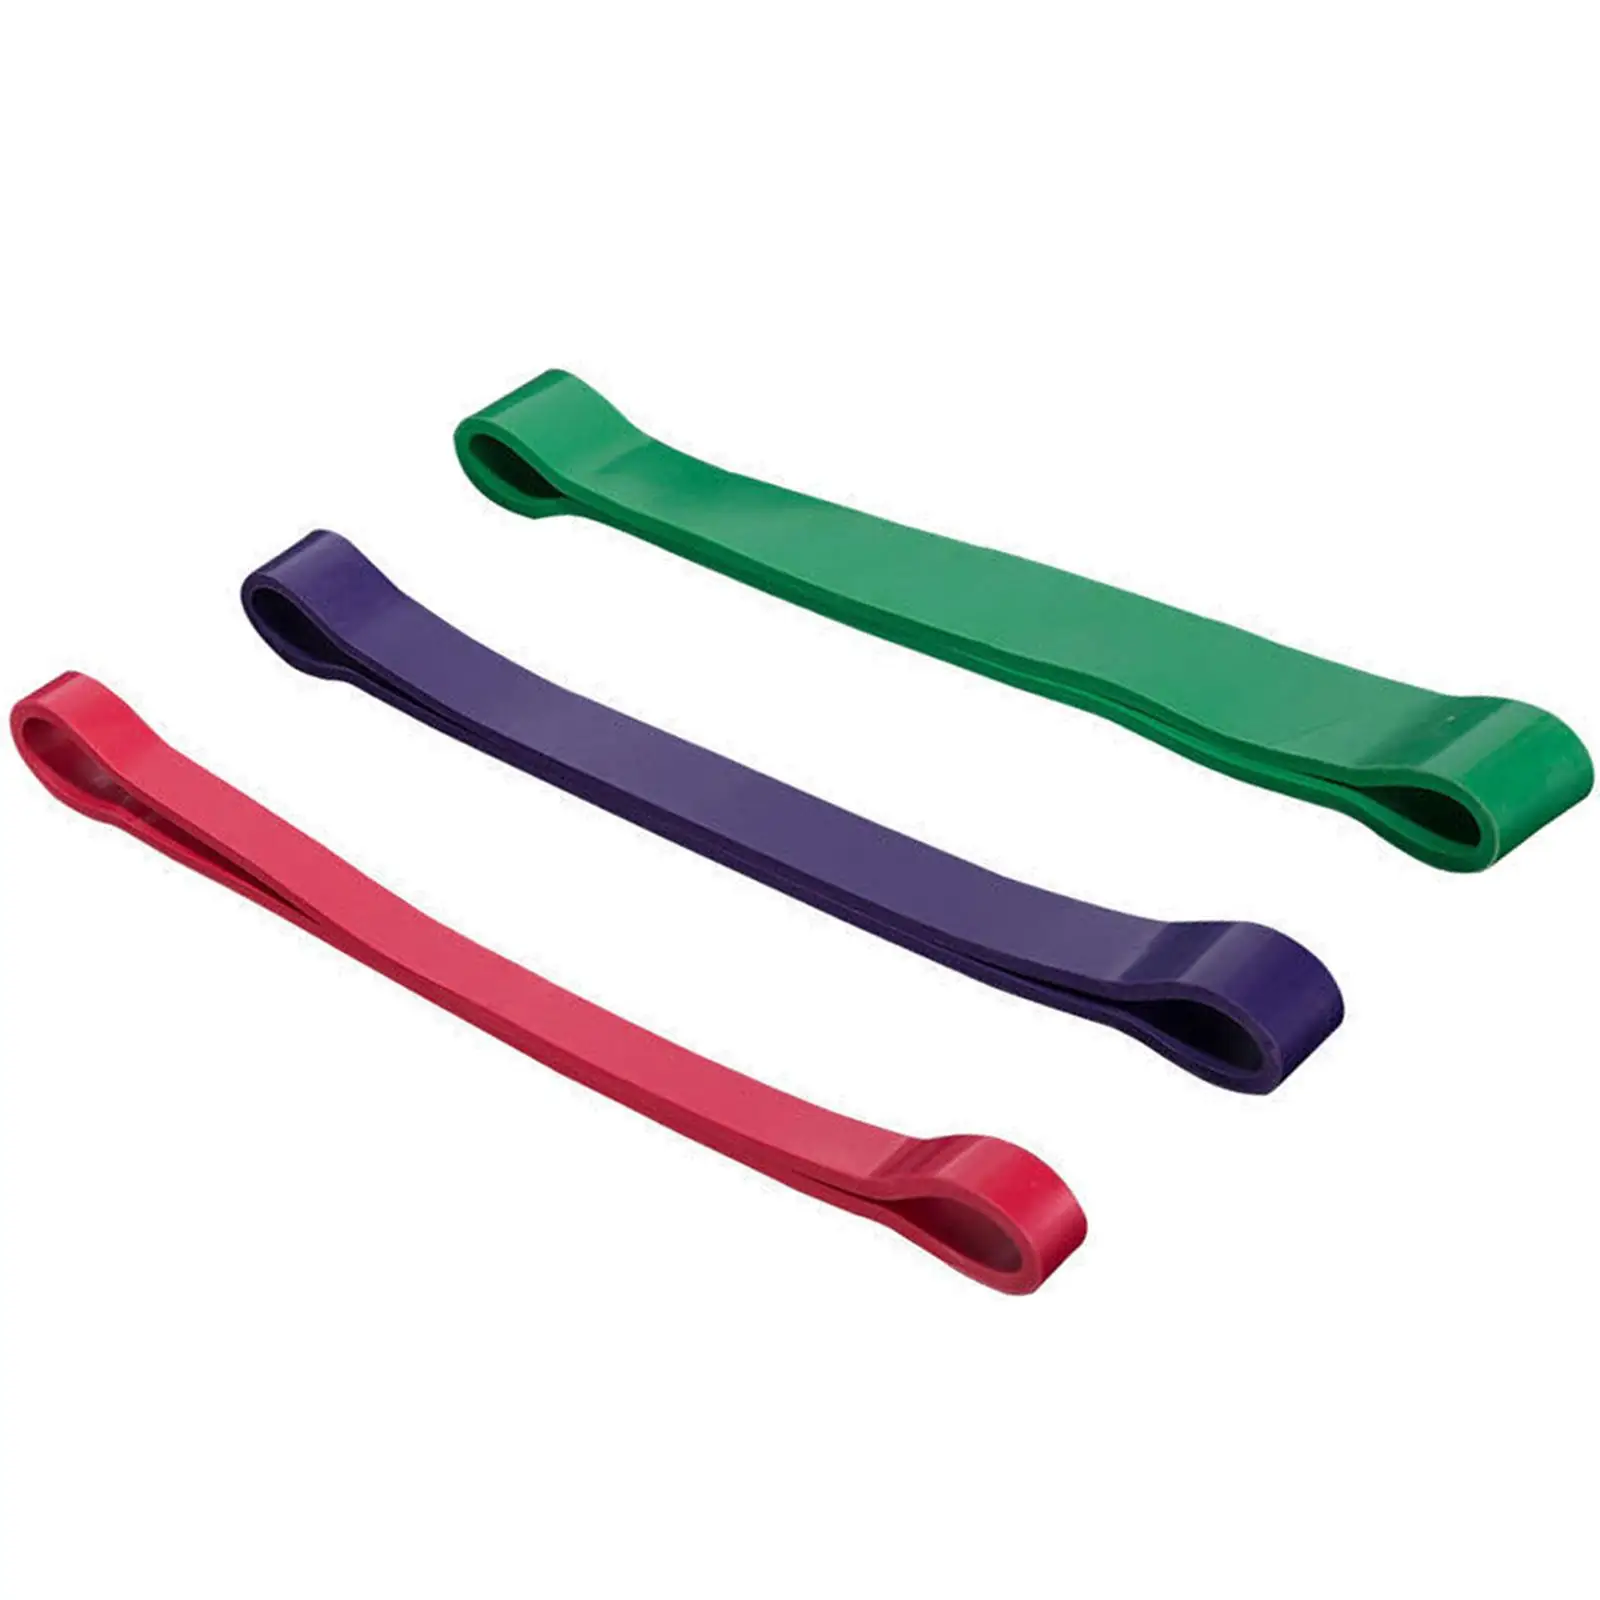 3x 3 Levels Resistance Bands, Fitness Equipment, Workout Bands, Non Slip Loops for Home Legs Women Exercise